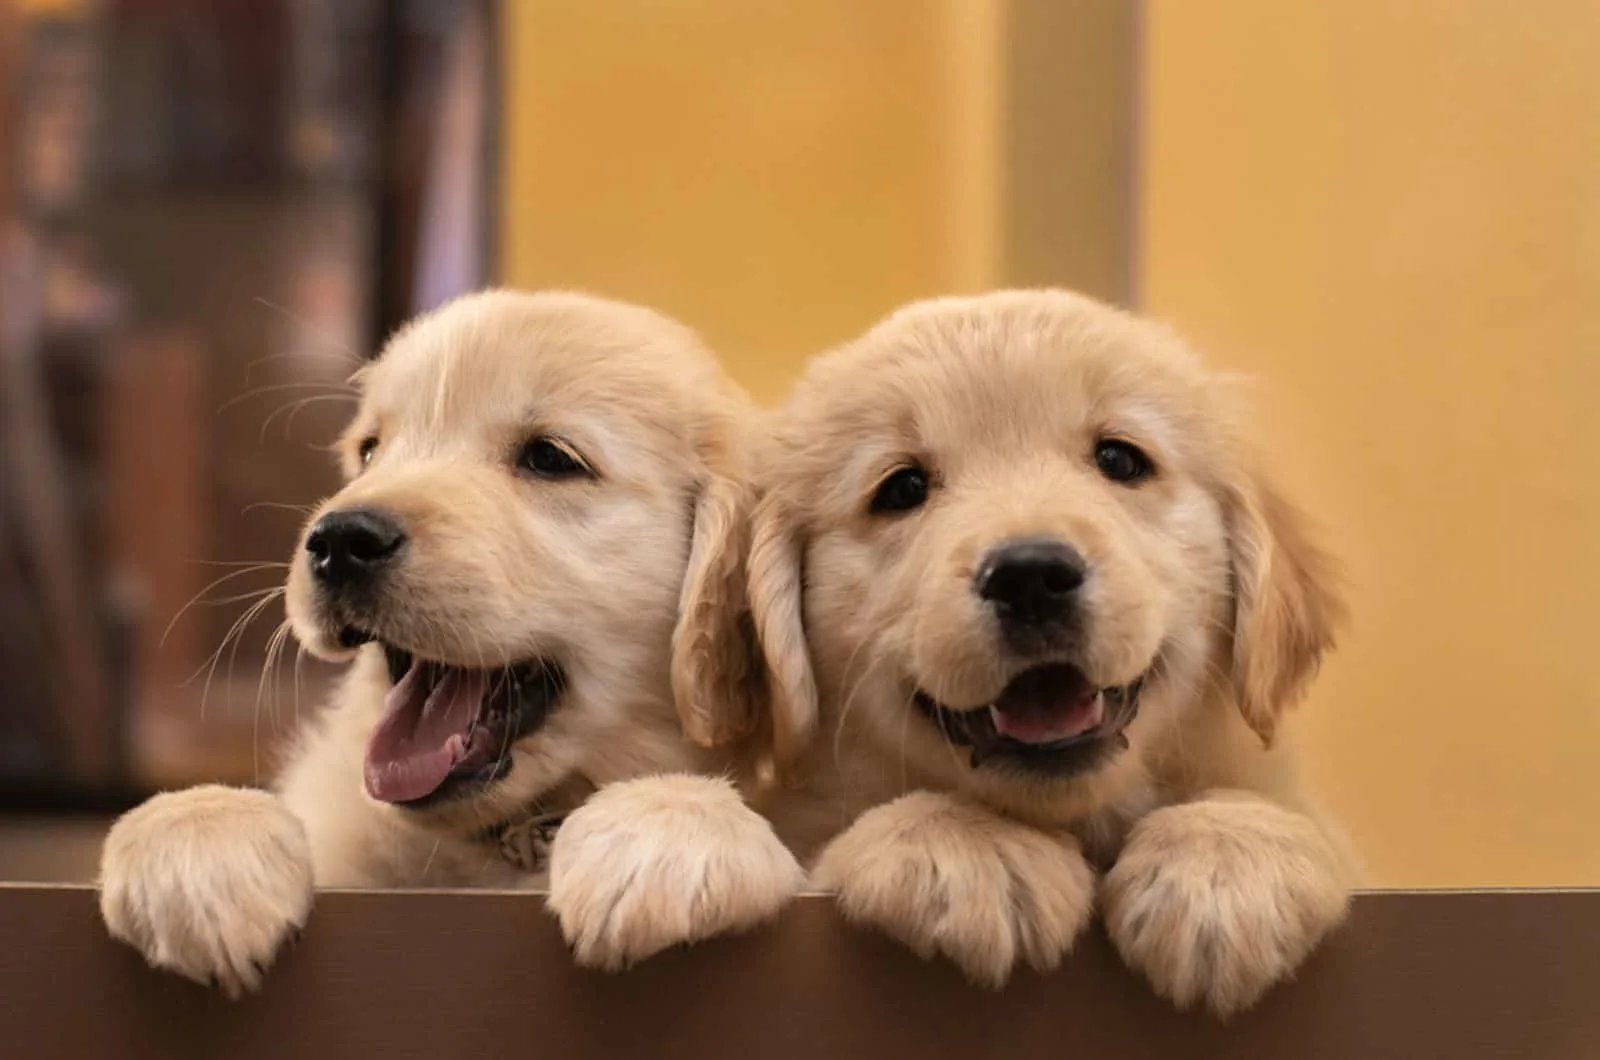 two golden retriever puppies playing together